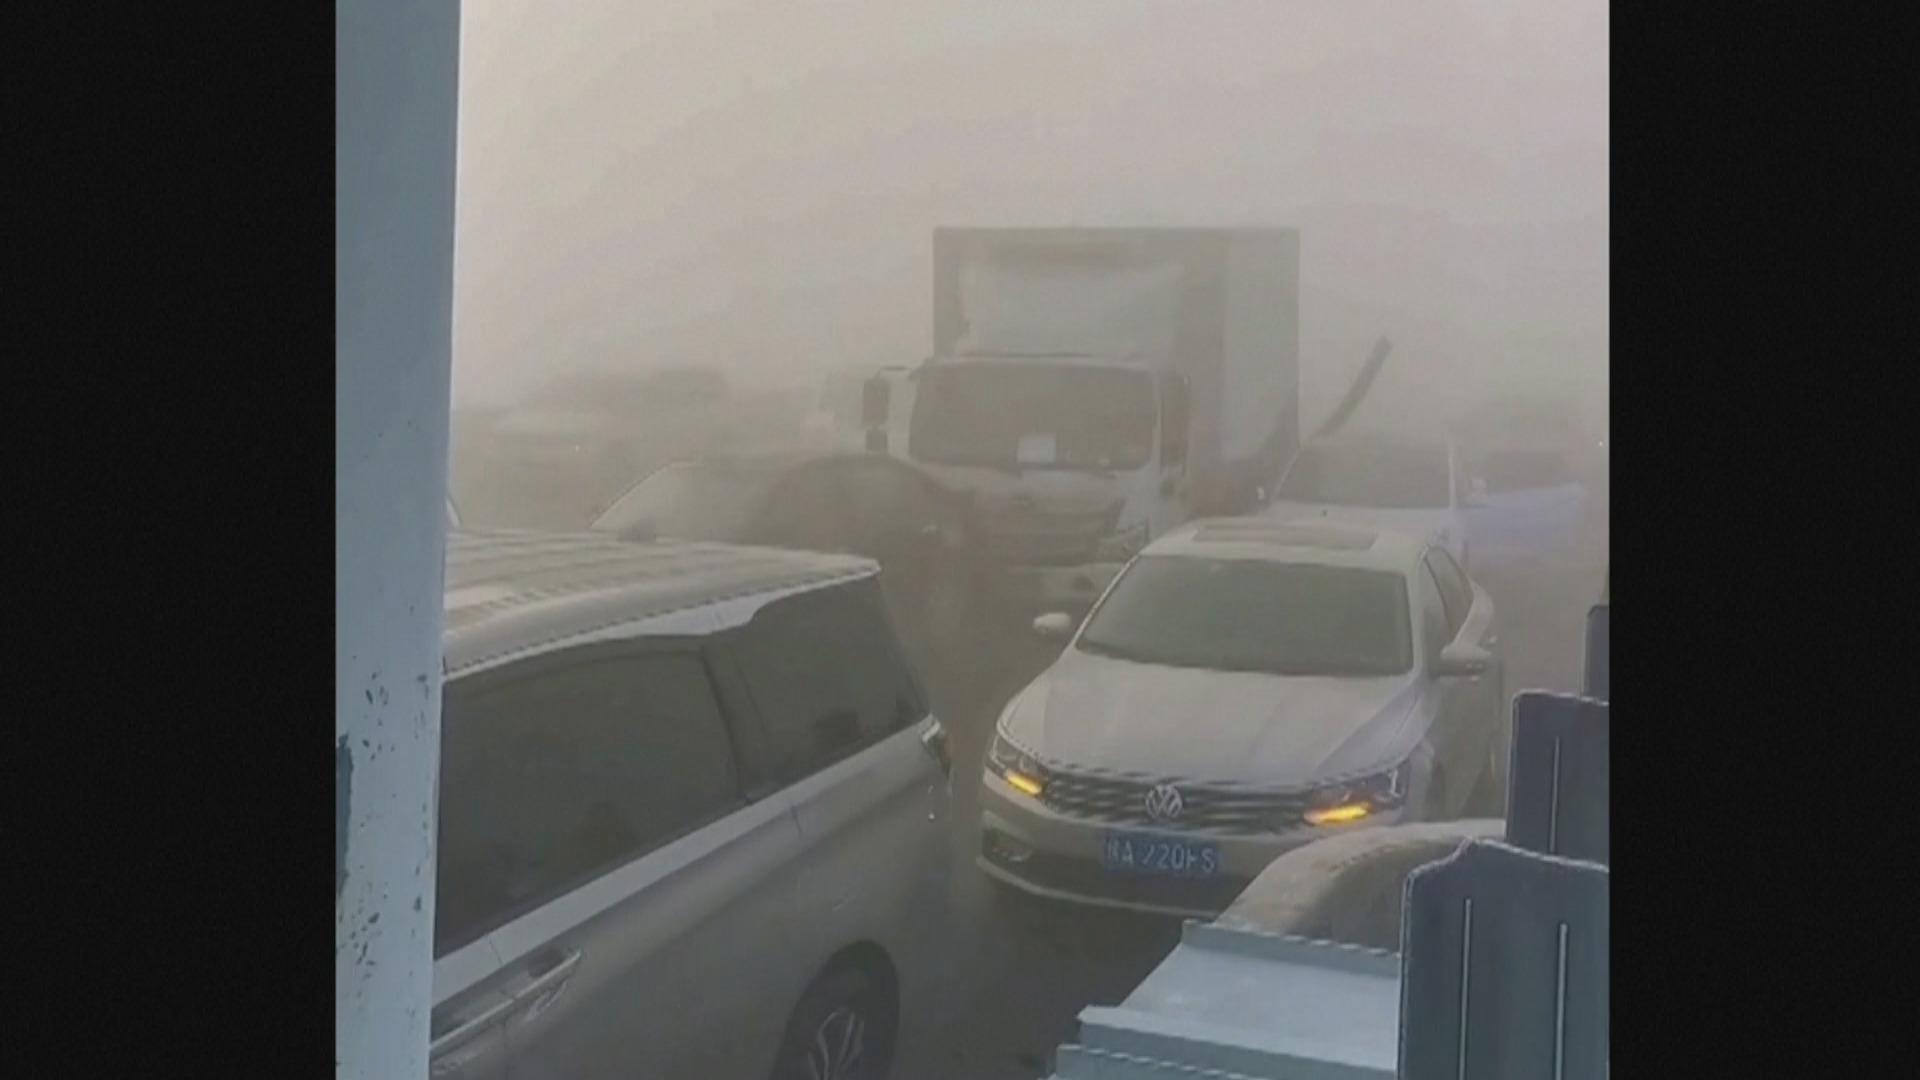 200 Cars Crash Into Each Other In China, Killing One Motorist